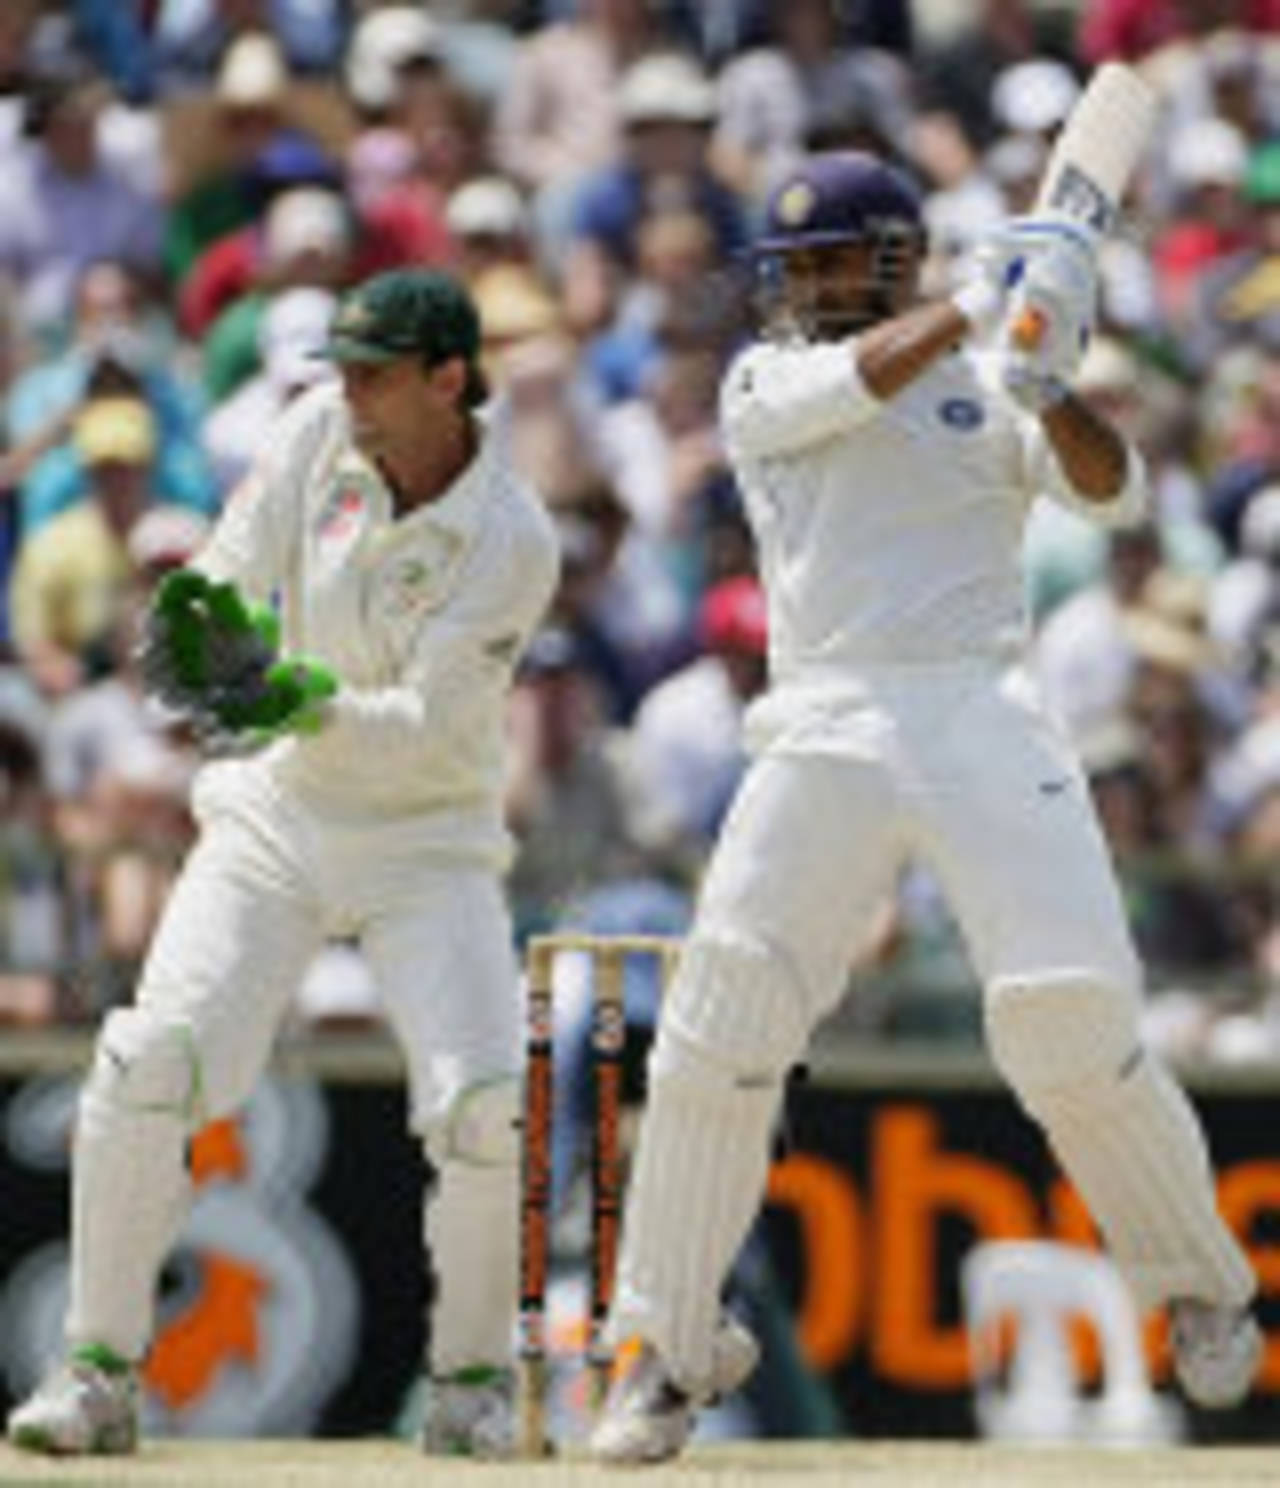 Mahendra Singh Dhoni tries to hit through the off side, Australia v India, 3rd Test, Perth, 3rd day, January 18, 2008